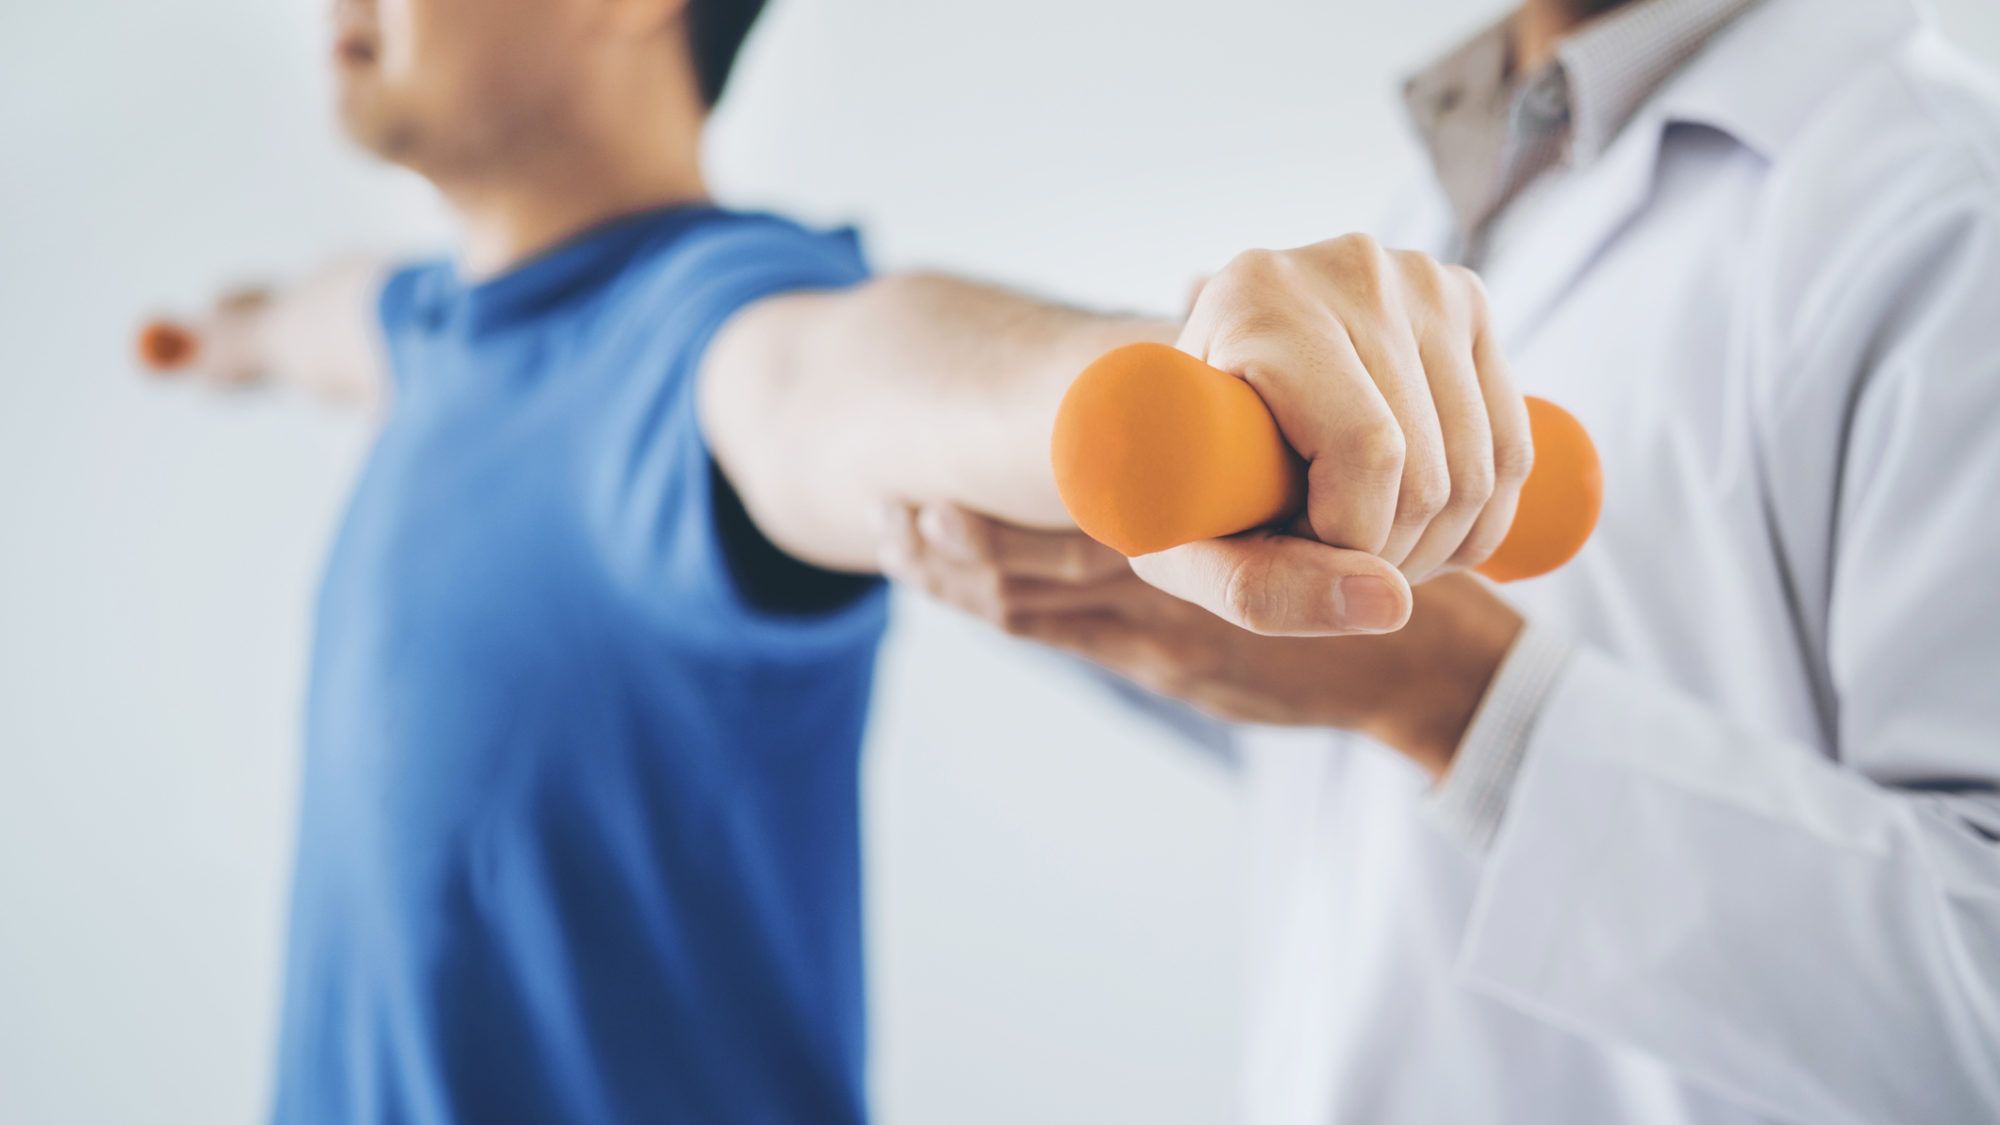 Physiotherapist helping patient exercise with dumbbells